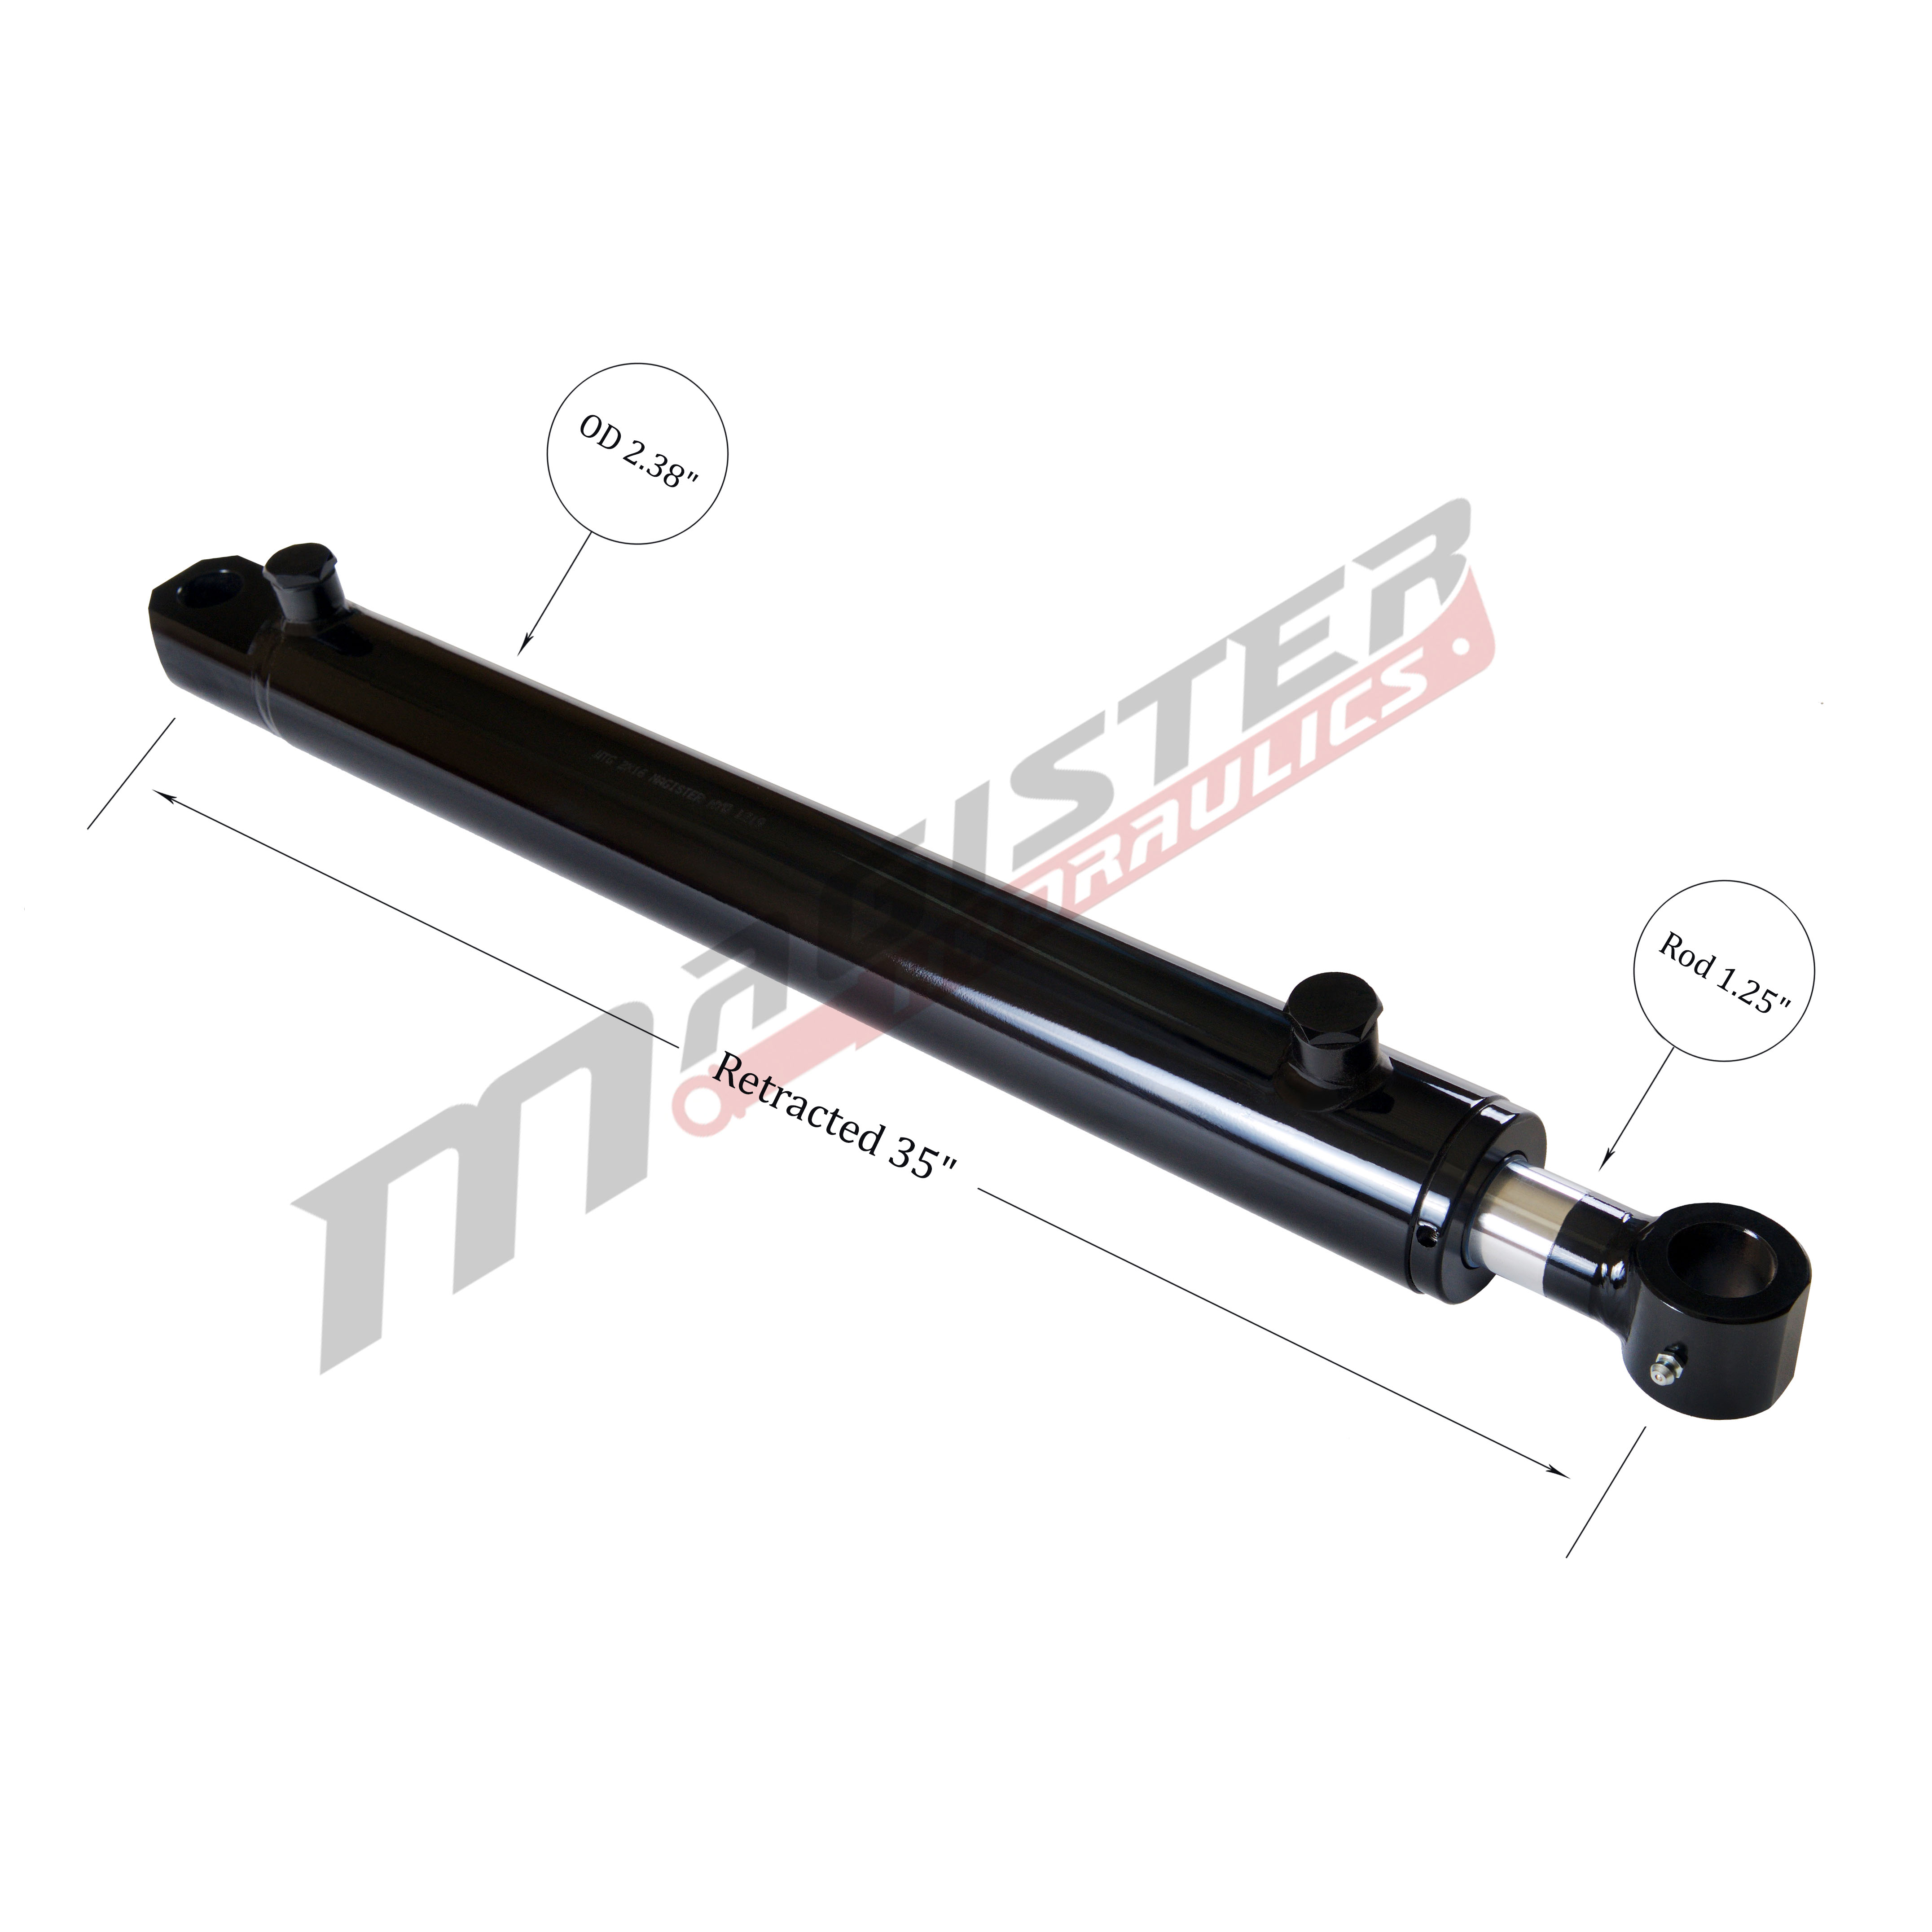 2 bore x 26 stroke hydraulic cylinder, welded tang double acting cylinder | Magister Hydraulics